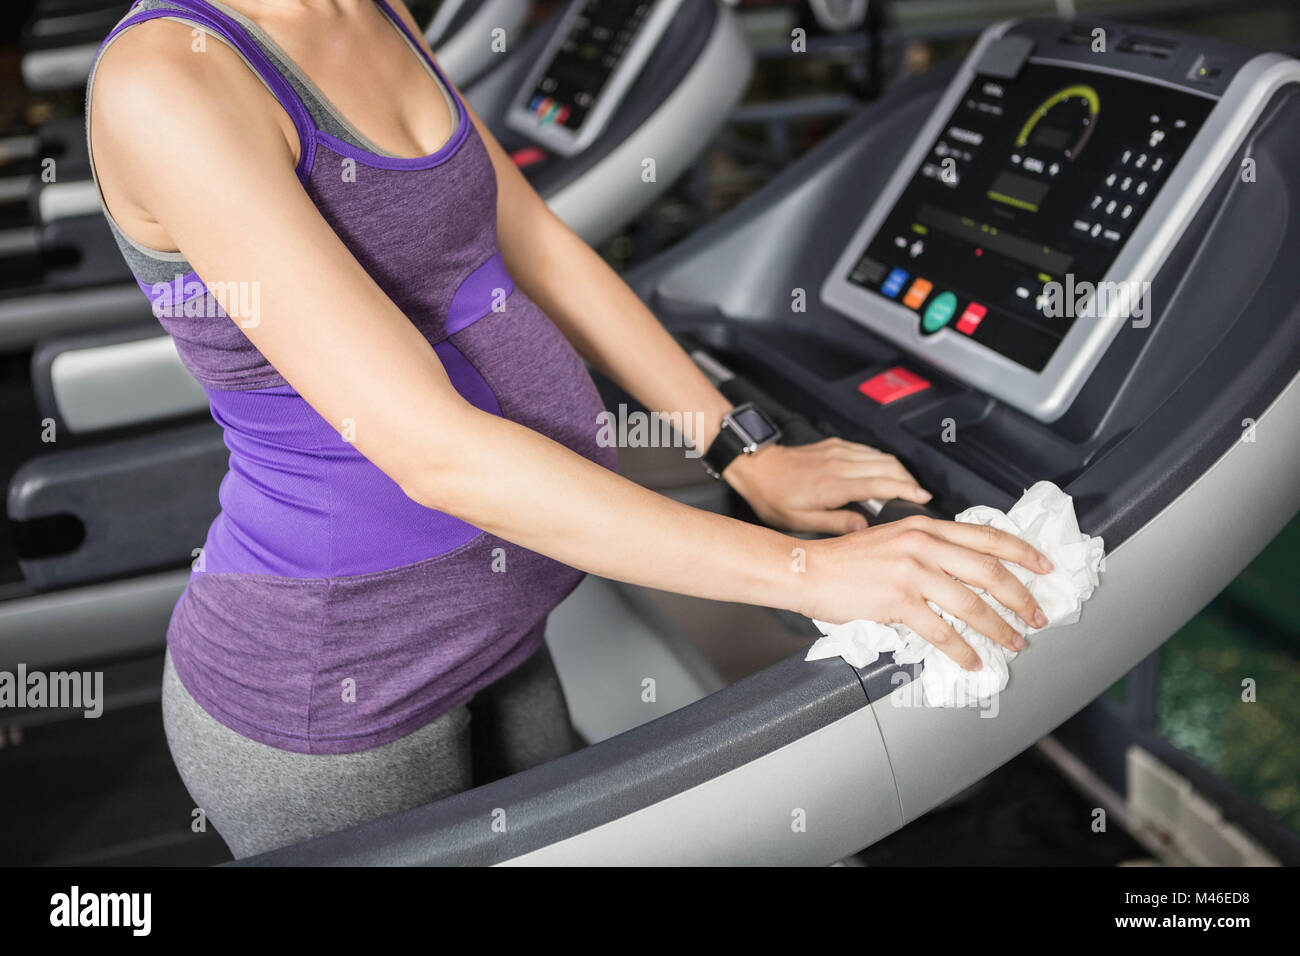 Mid section of pregnant woman cleaning treadmill Stock Photo